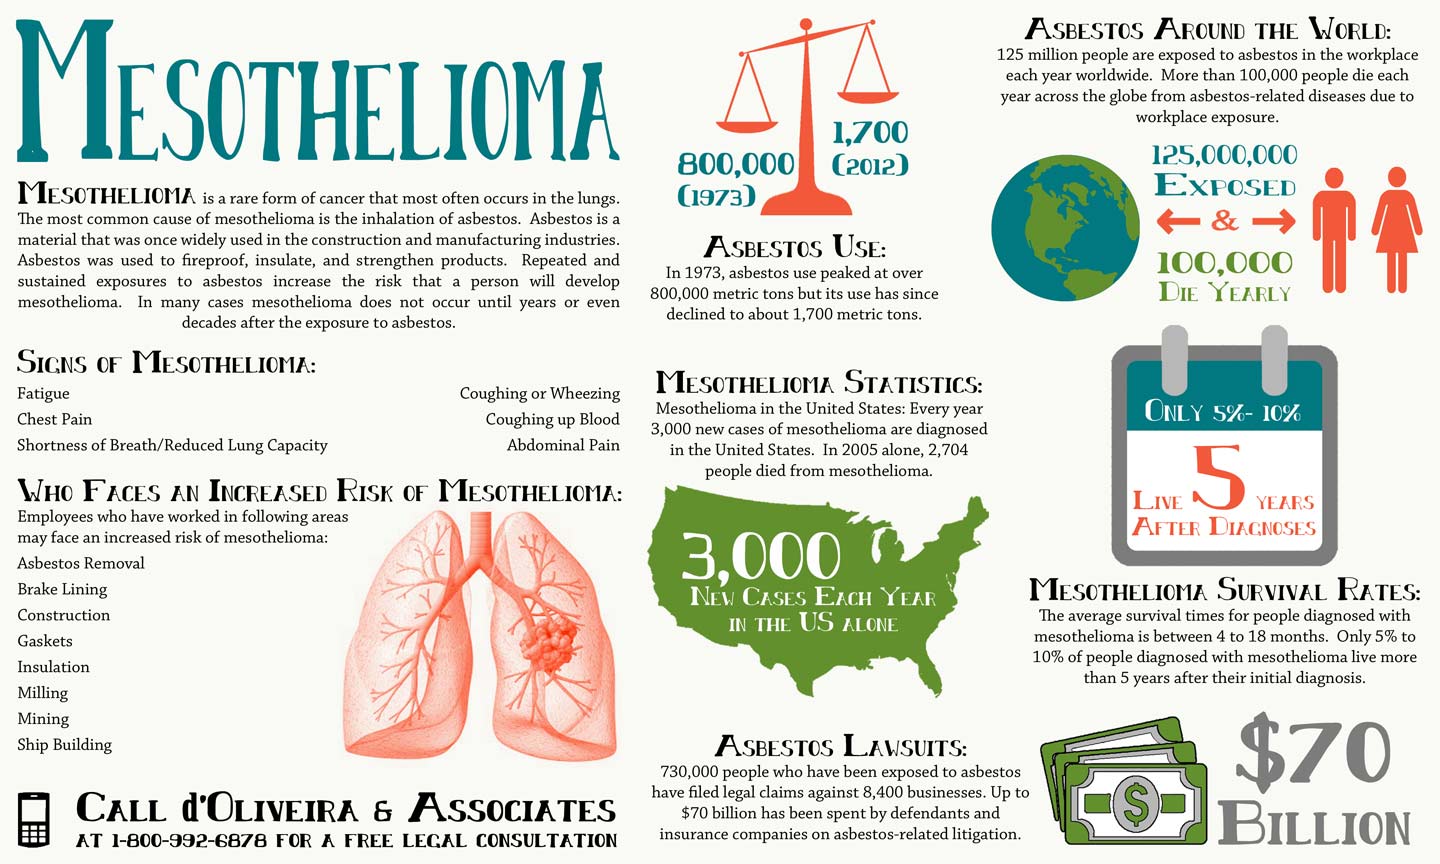 Mesothelioma Infographic with Signs, Statistics and Increased Risk of Mesothelioma from Asbestos